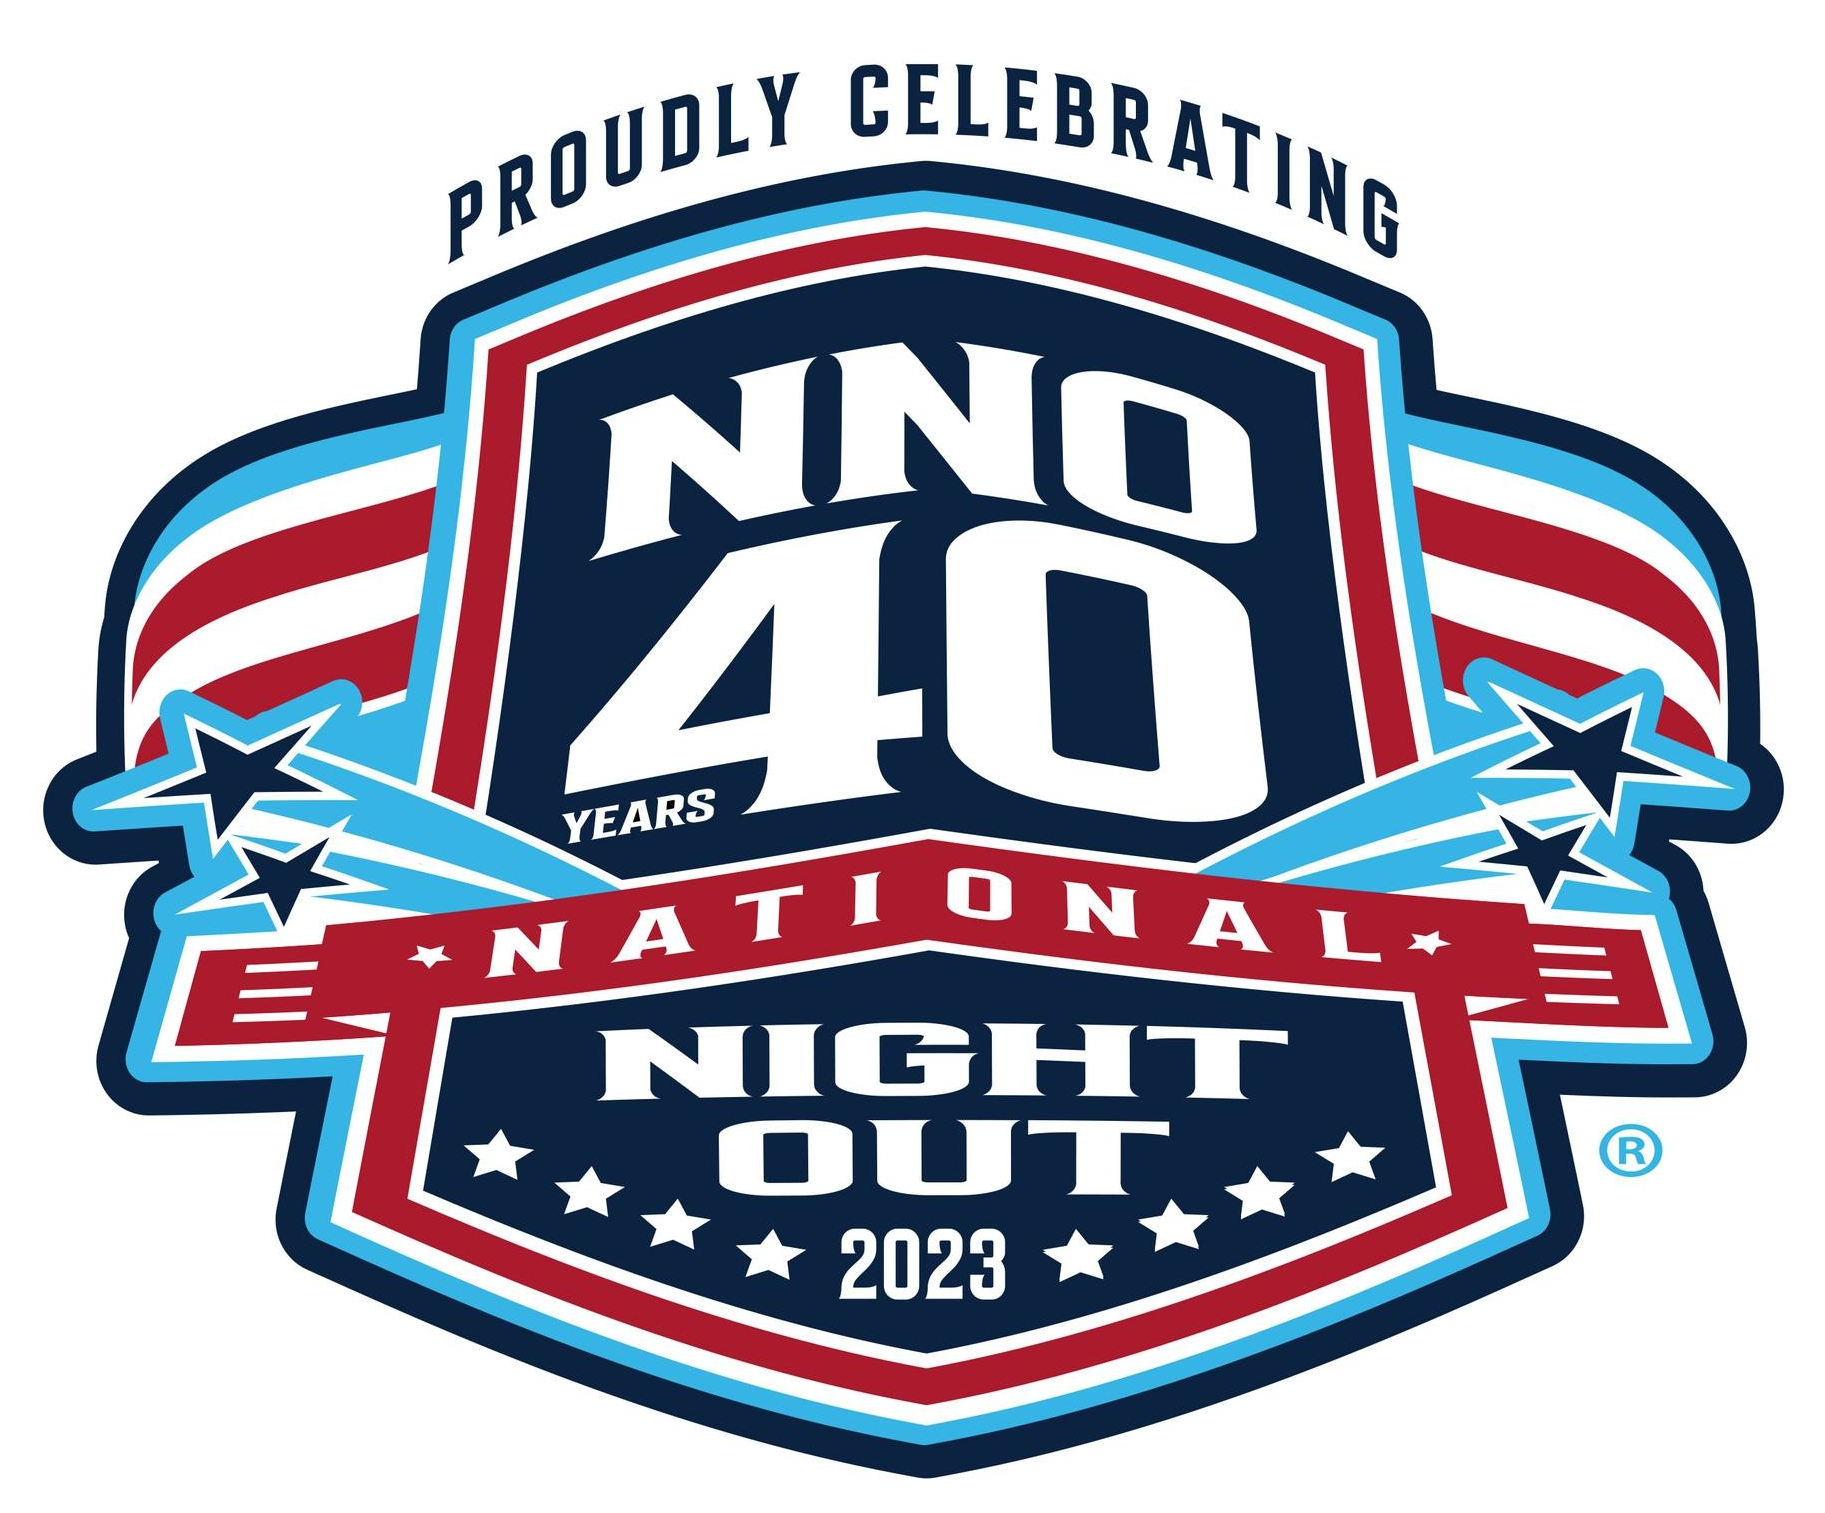 Register Your Subdivision for National Night Out 2023